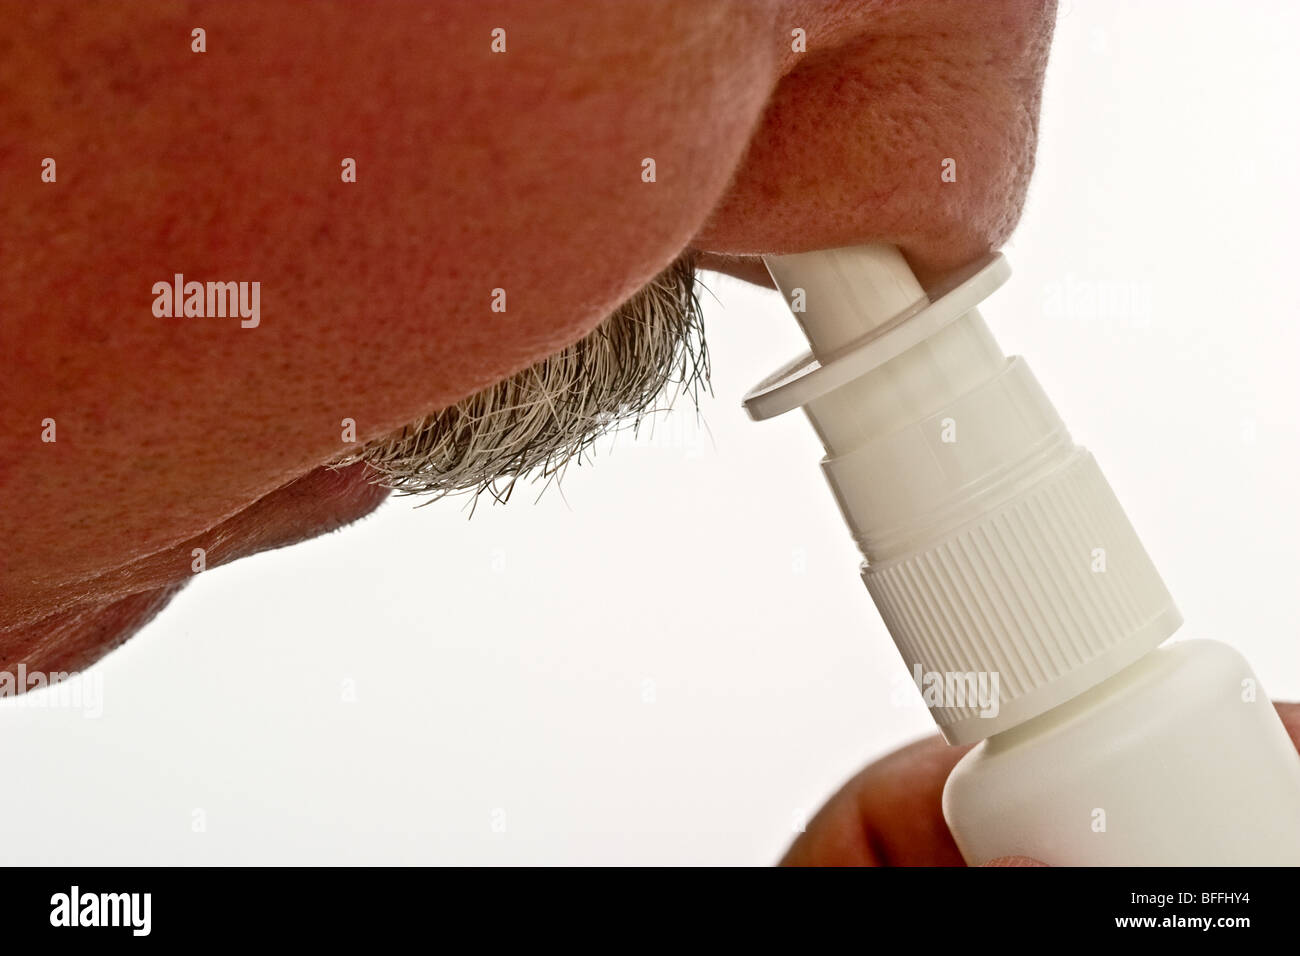 Man with a moustache and a nasal spray dispenser in his nose Stock Photo